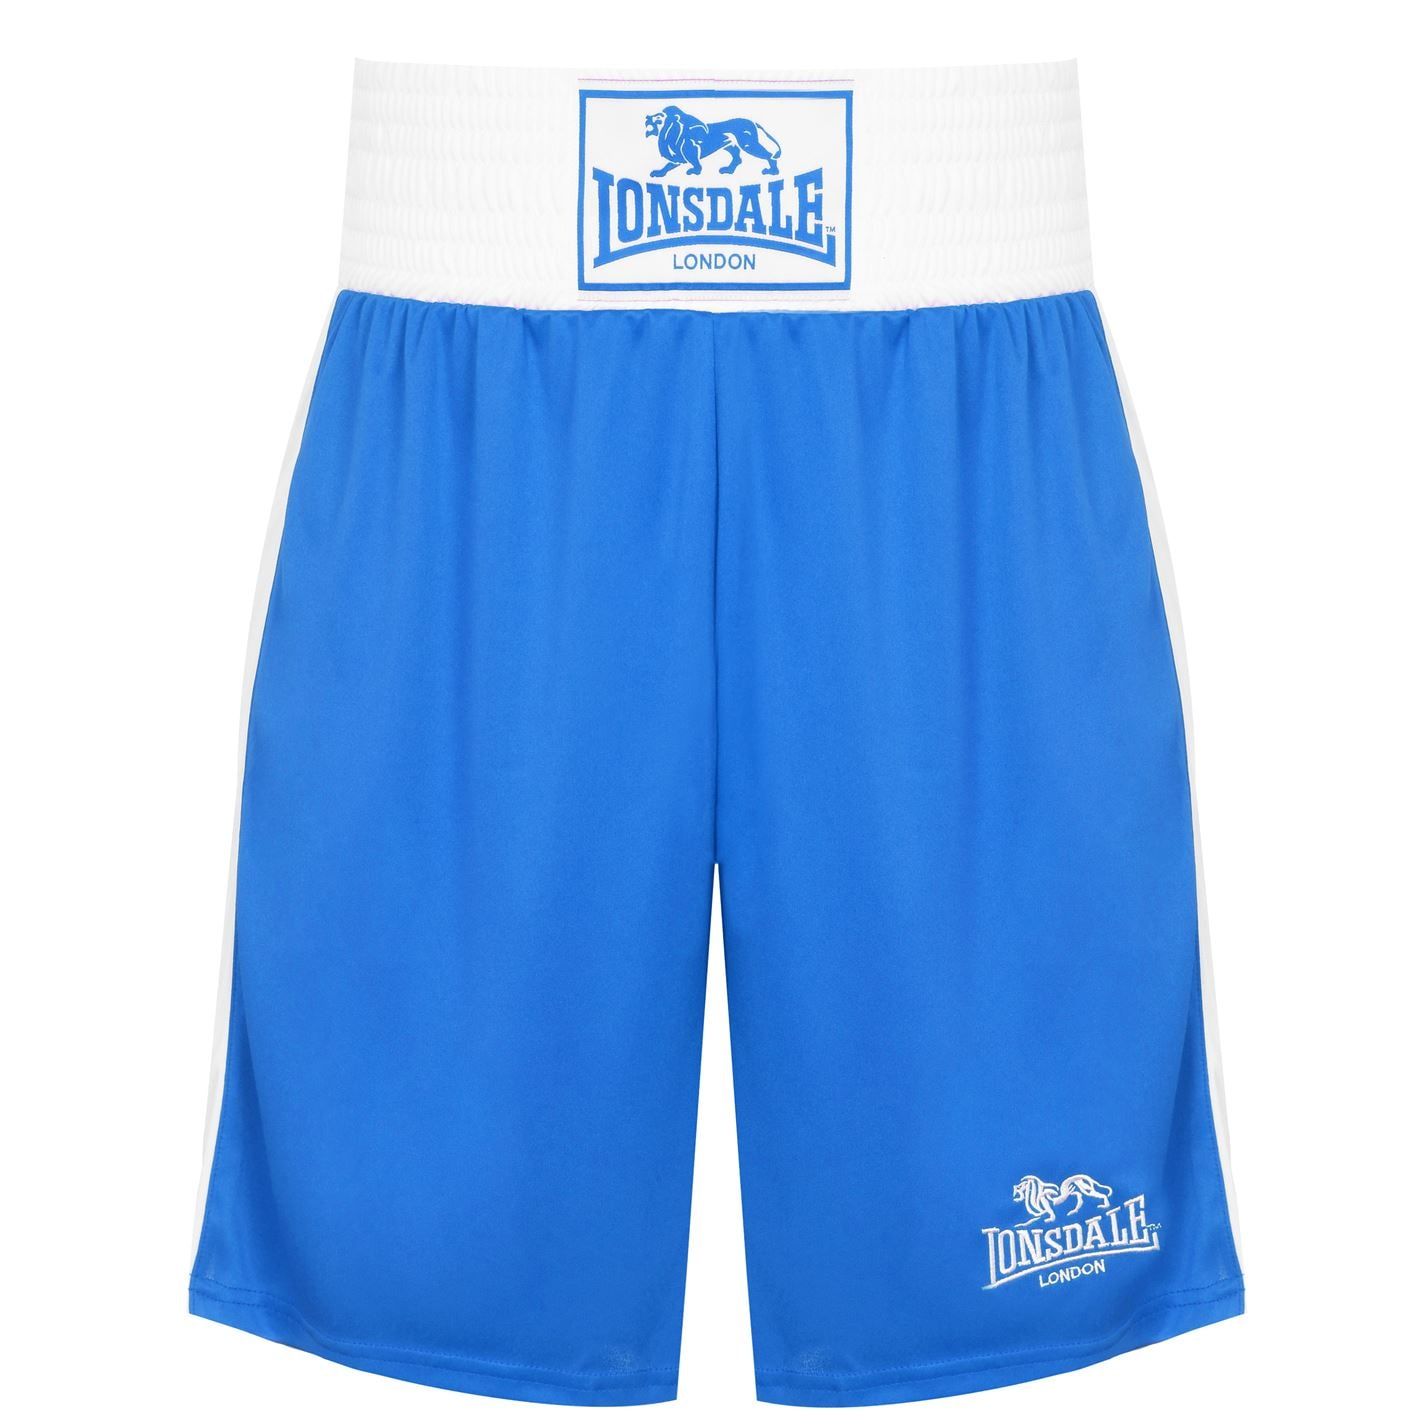 <strong>Lonsdale Boxing Shorts Mens</strong><br><br> The <strong>Mens Lonsdale Boxing Shorts</strong> are ideal for competition or training use, featuring a wide waistband with elasticated trim offering up a comfortable fit. These <strong>Lonsdale shorts</strong> are finished off with the Lonsdale tag to the waist is complimented with the Lonsdale logo to the front and rear of the thighs for a classic look.<br>> <strong>Mens boxing shorts</strong><br>> Wide elasticated waistband<br>> Contrasting side panels<br>> Lonsdale tag and logo<br>> 100% Polyester<br>> Machine washable